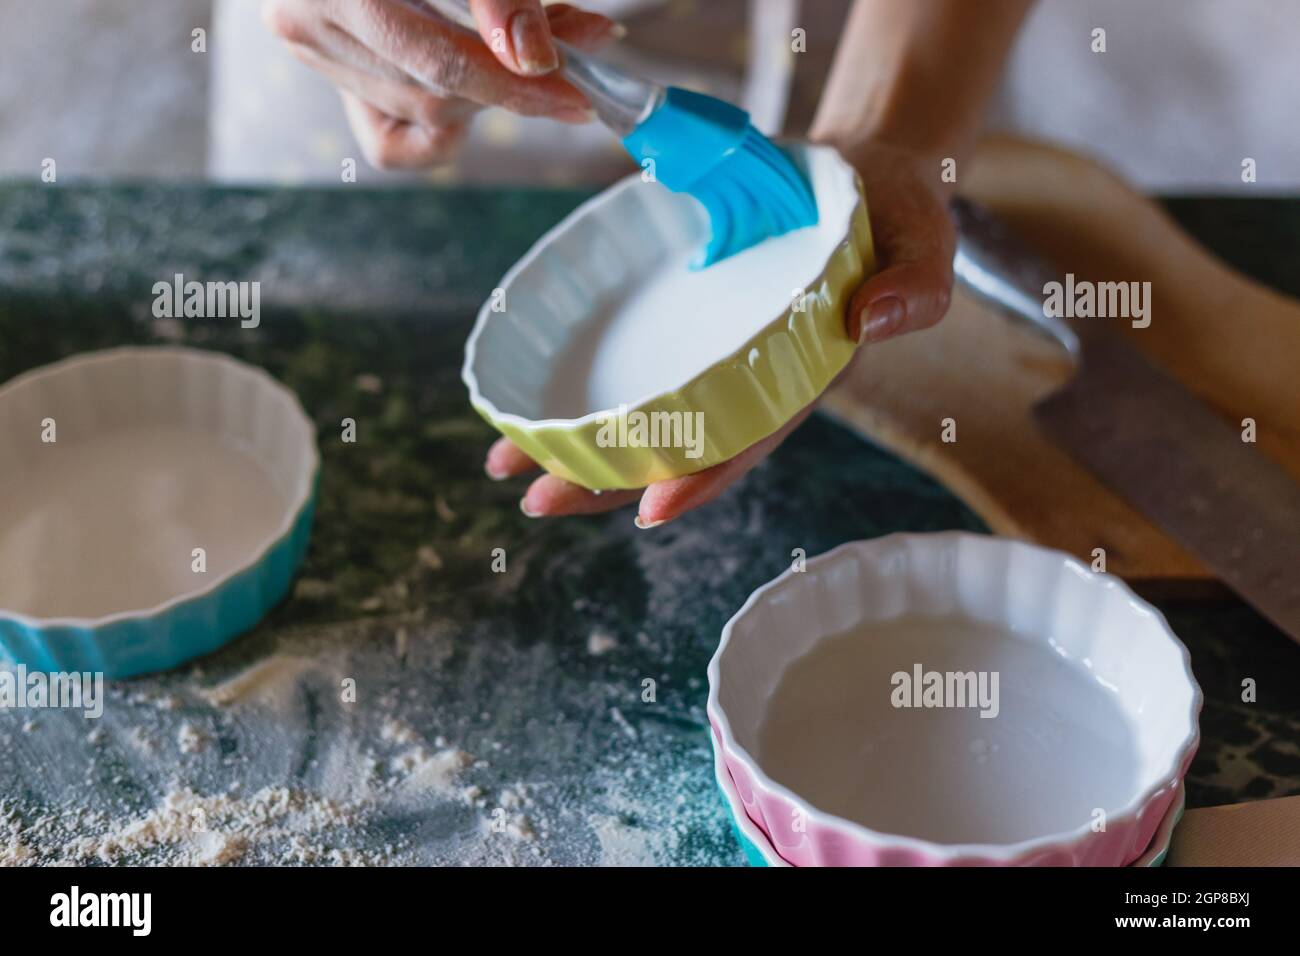 Woman greasing baking mould before adding batter. Stock Photo